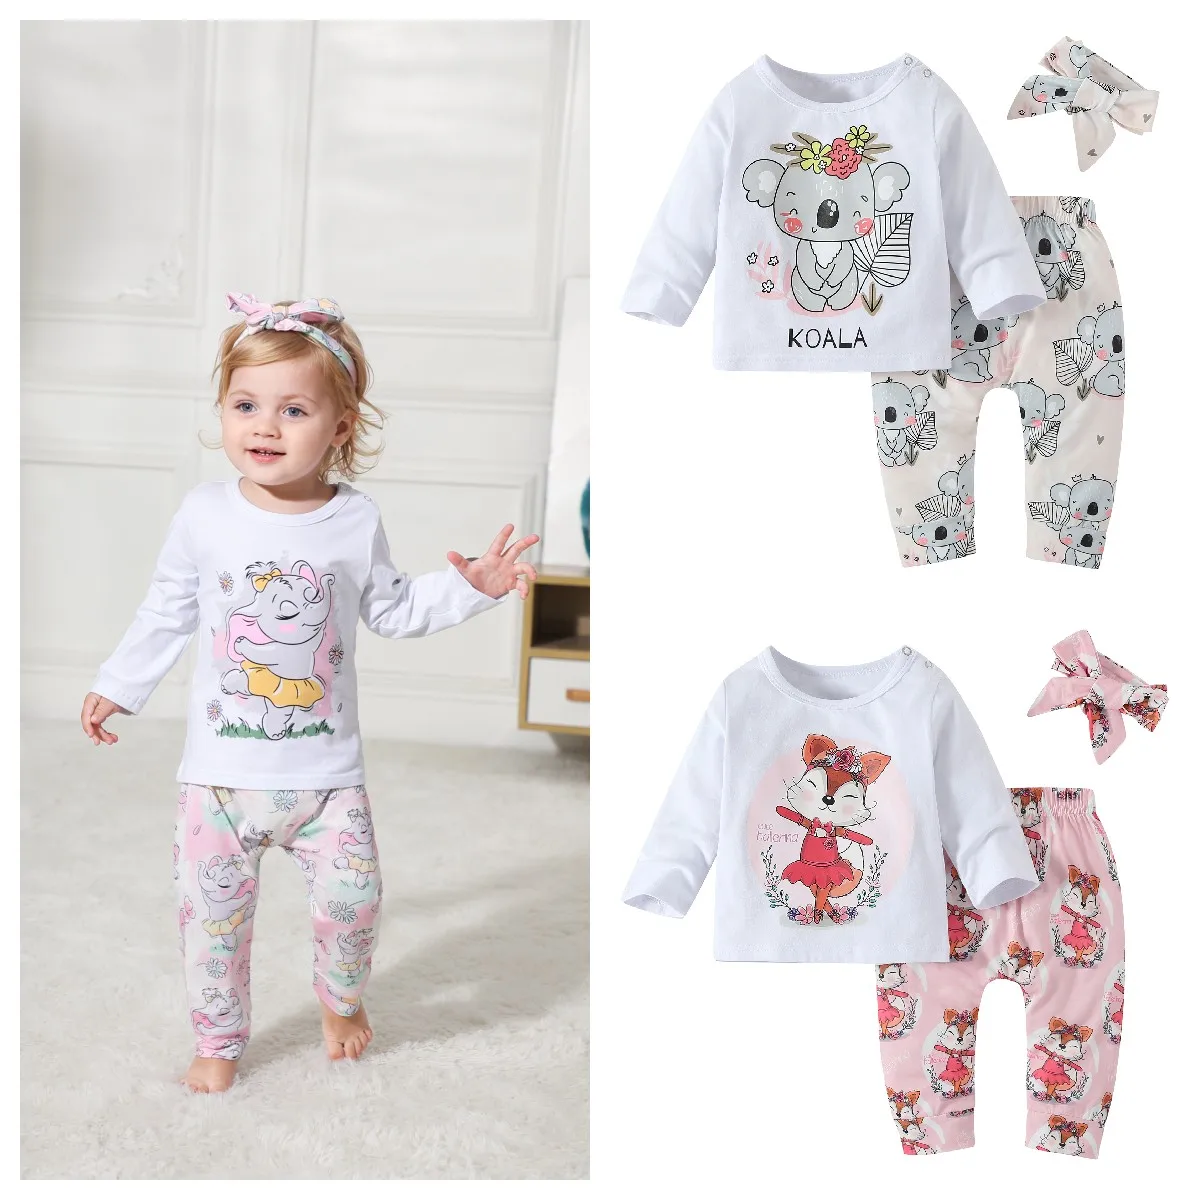 Newborn Baby Girl Clothes Set  Long Sleeve T shirt  +  Pants + headband 3pcs/set  Infant Toddler Clothing Outfits For Autumn